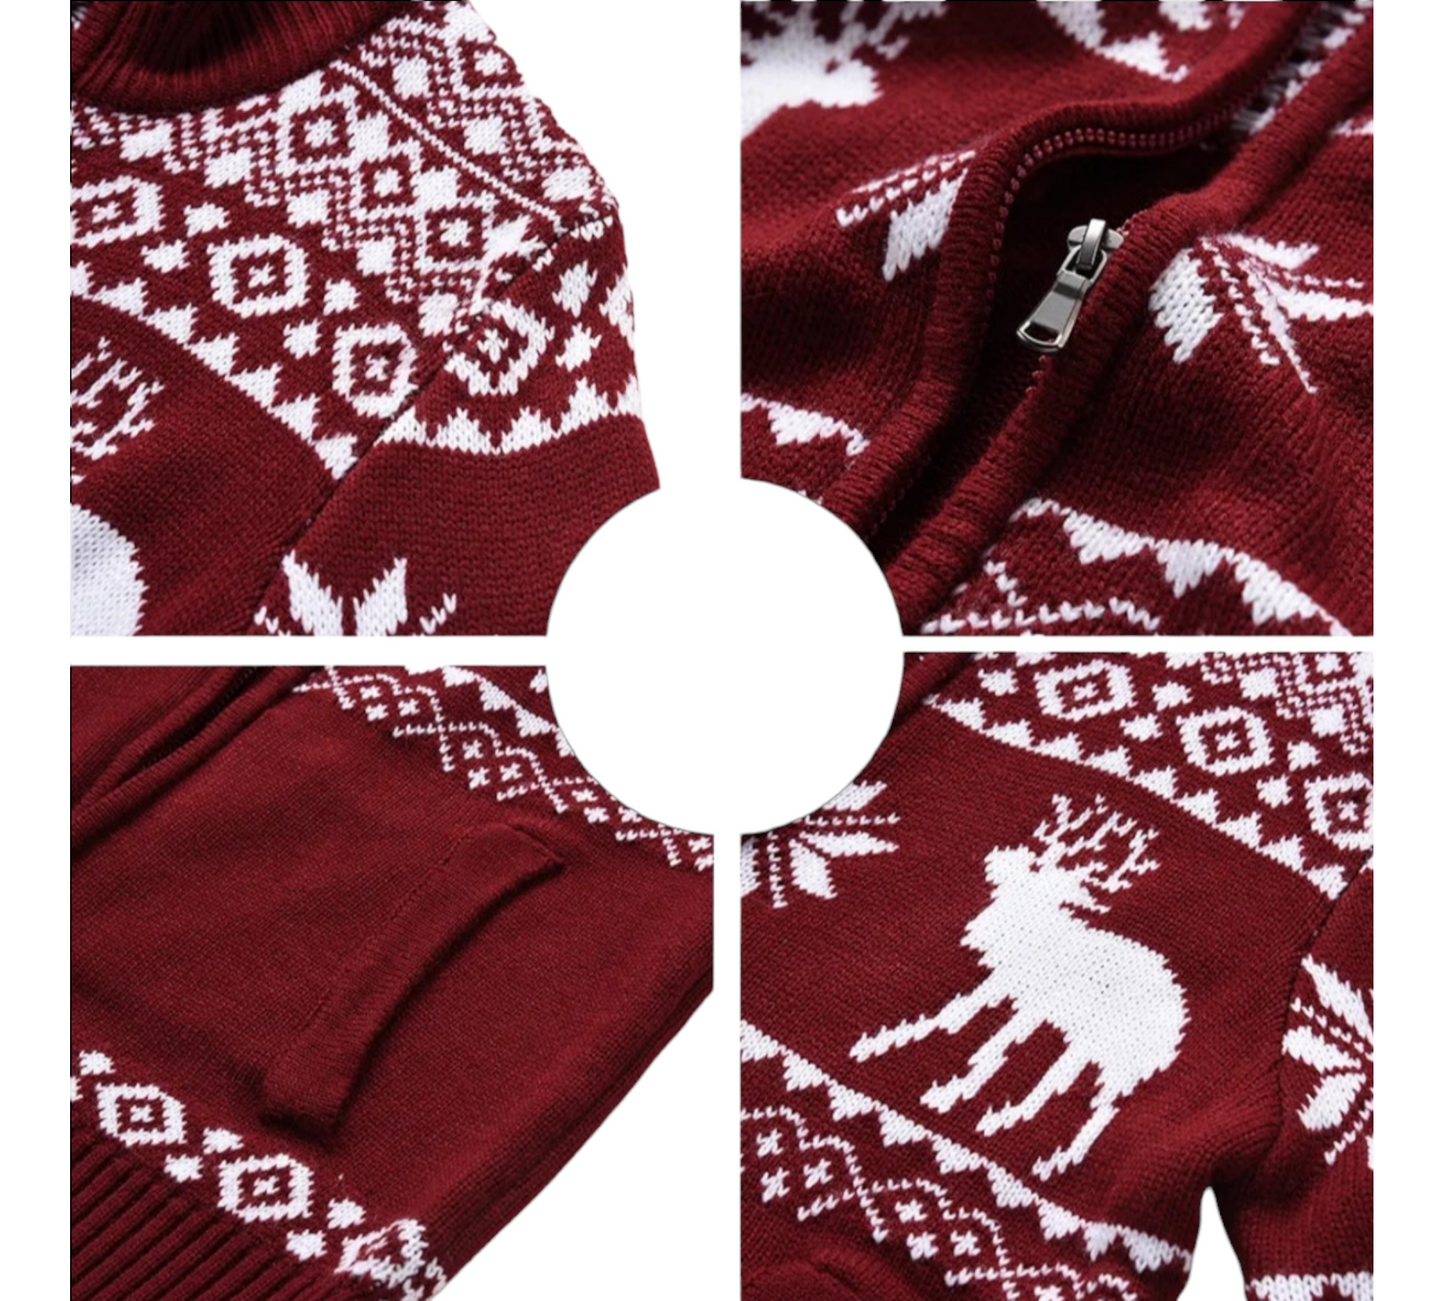 Stylish Men's Christmas Sweater Jacket for Autumn and Winter